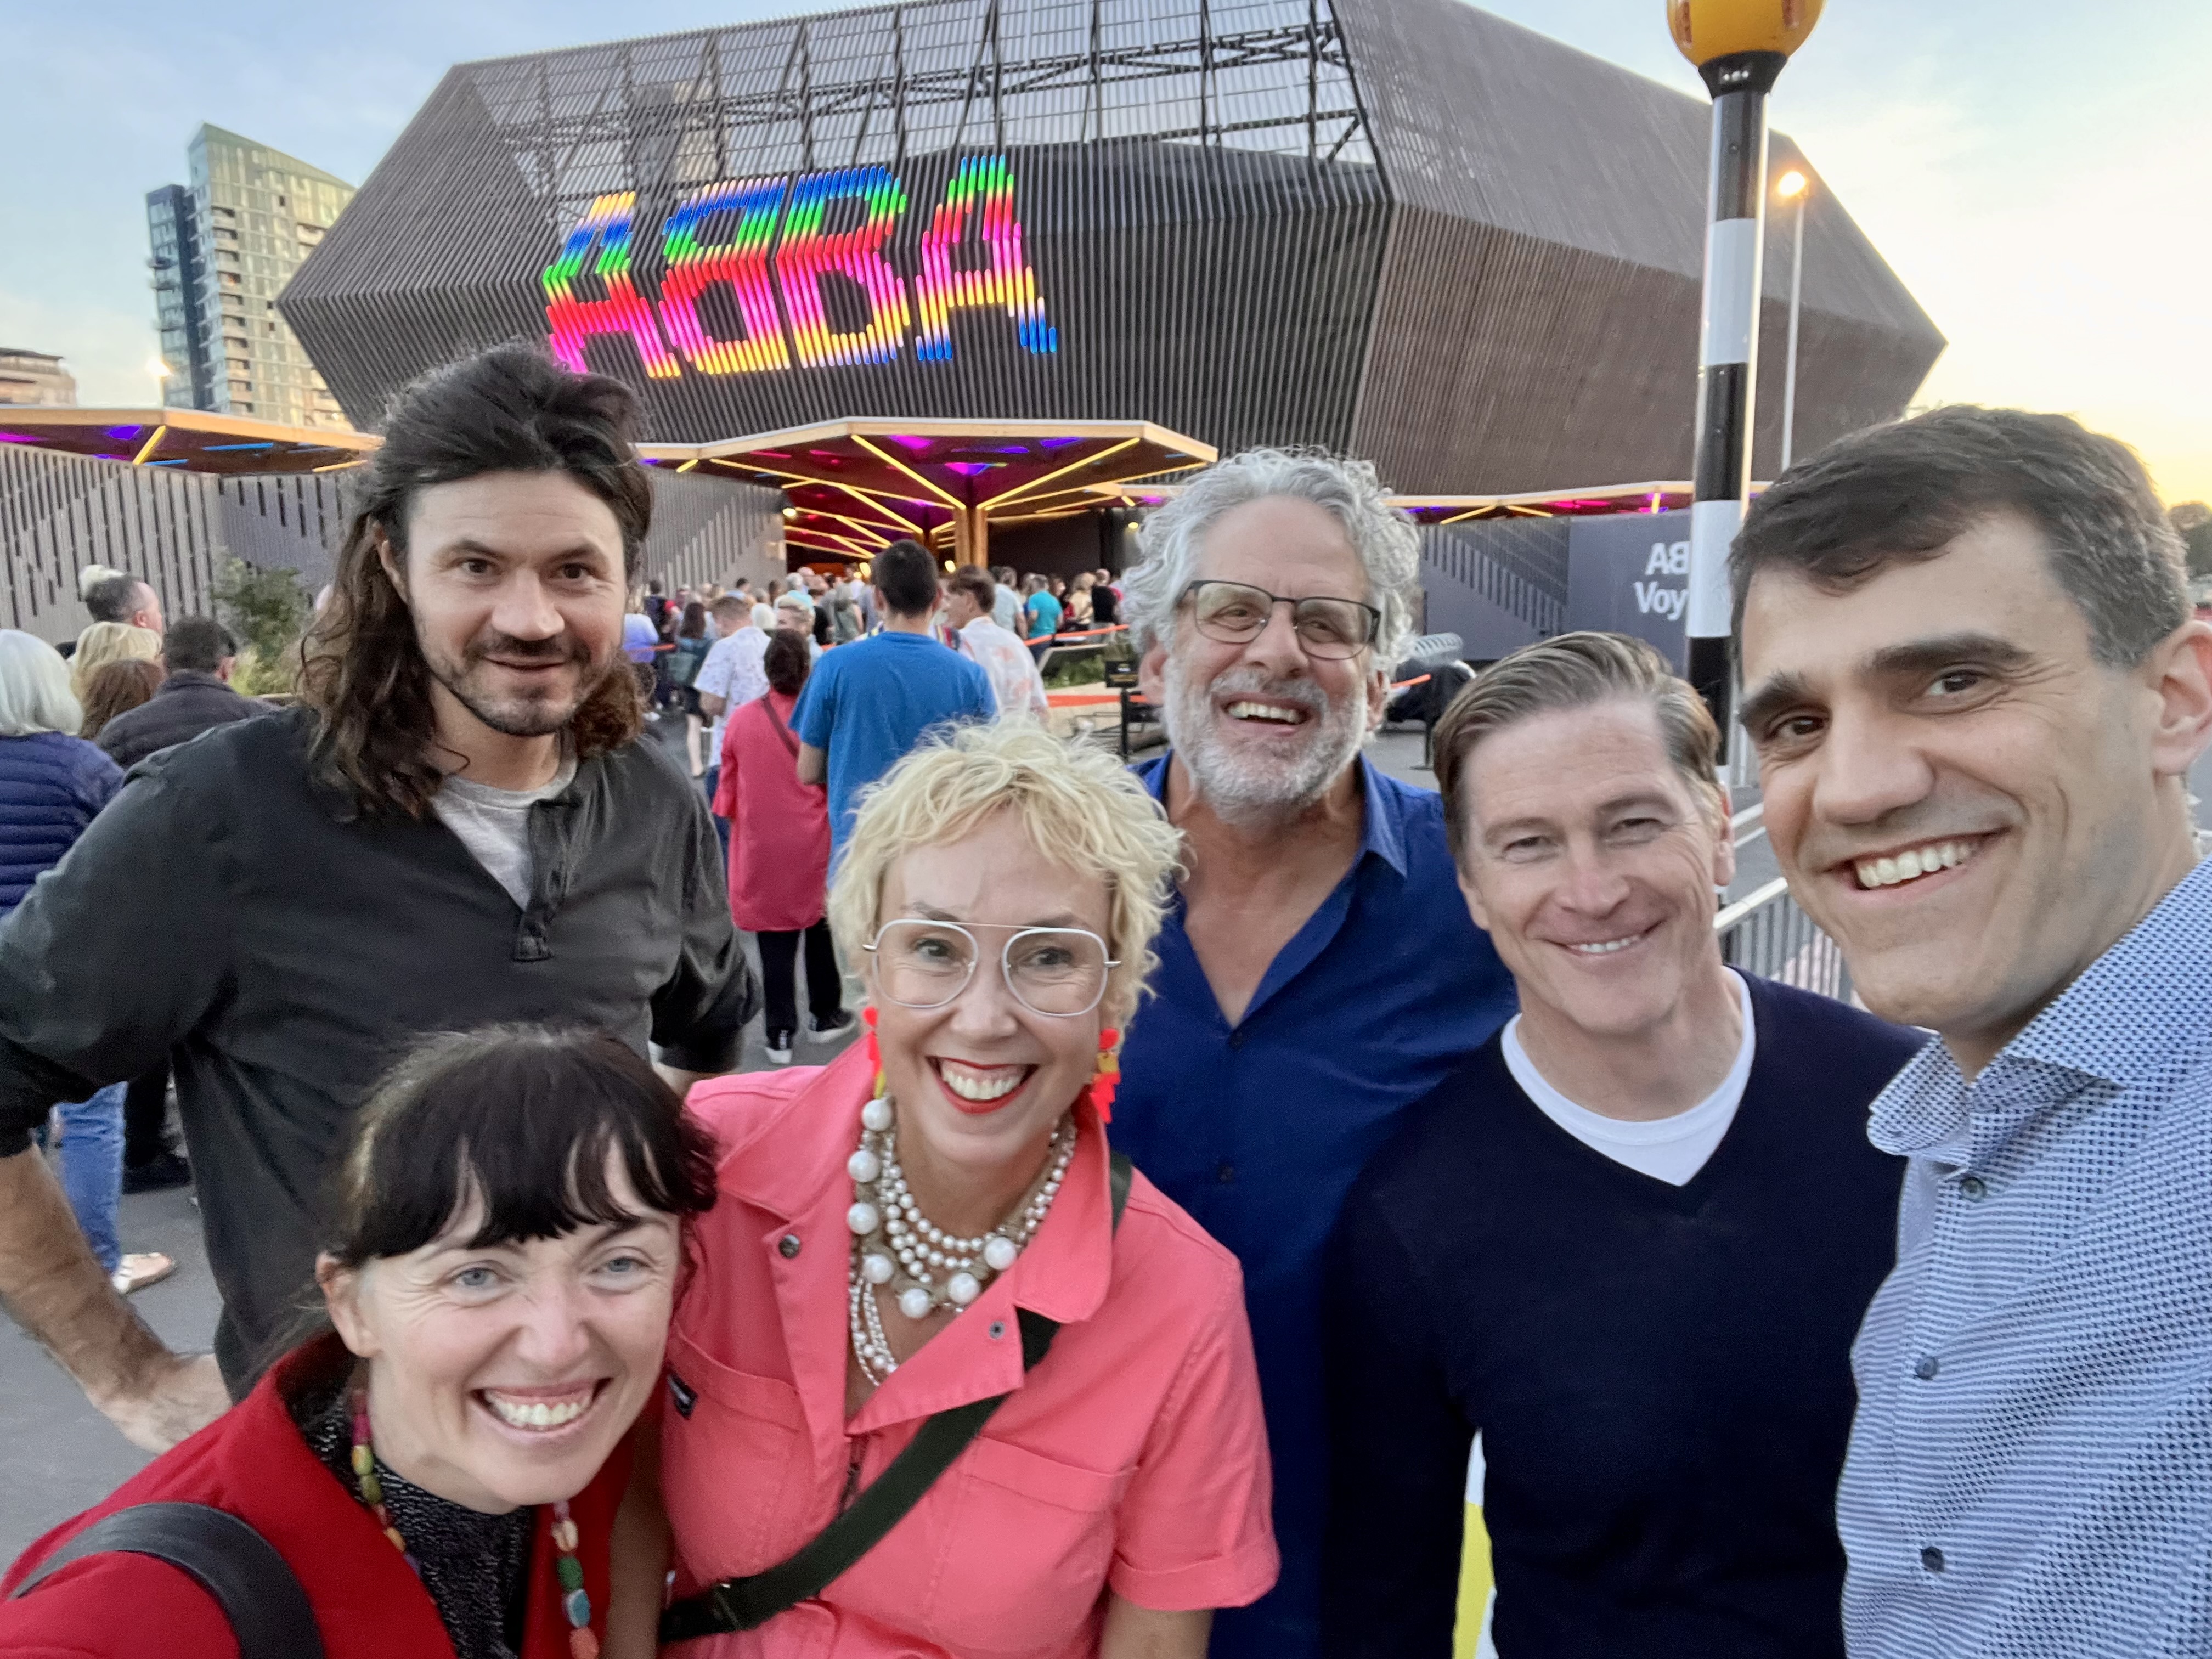 ph Holmes, Lisa Gray, Megan Elliott, Andy Belser, Hank Stratton and Felix Olschofka attended ABBA Voyage during their visit to London earlier this month to explore the future of design in live performance. Courtesy photo.